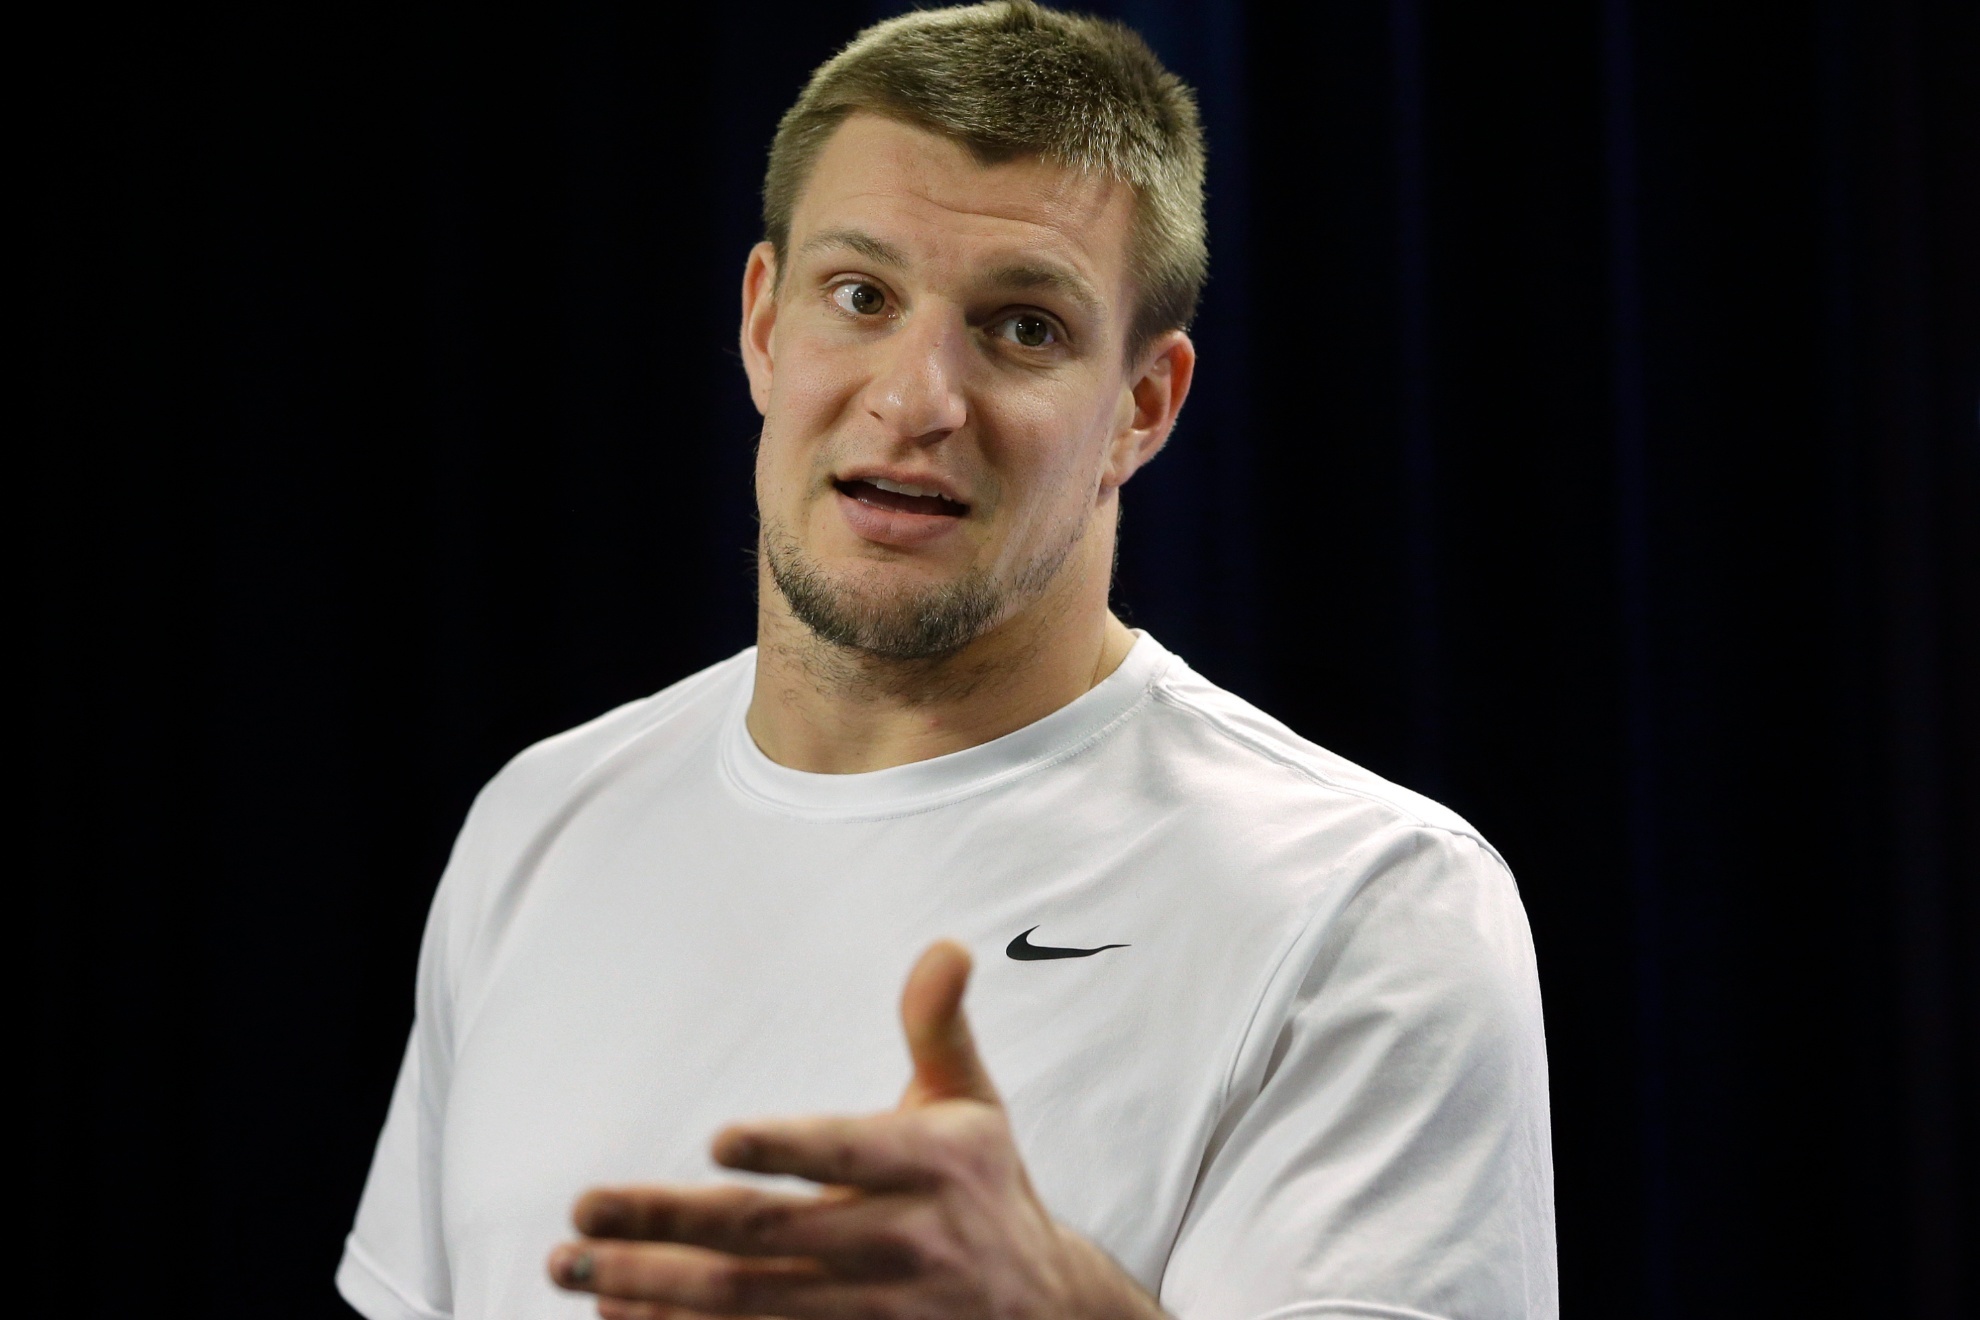 Former Patriots and Buccaneers star tight end, Rob Gronkowski.